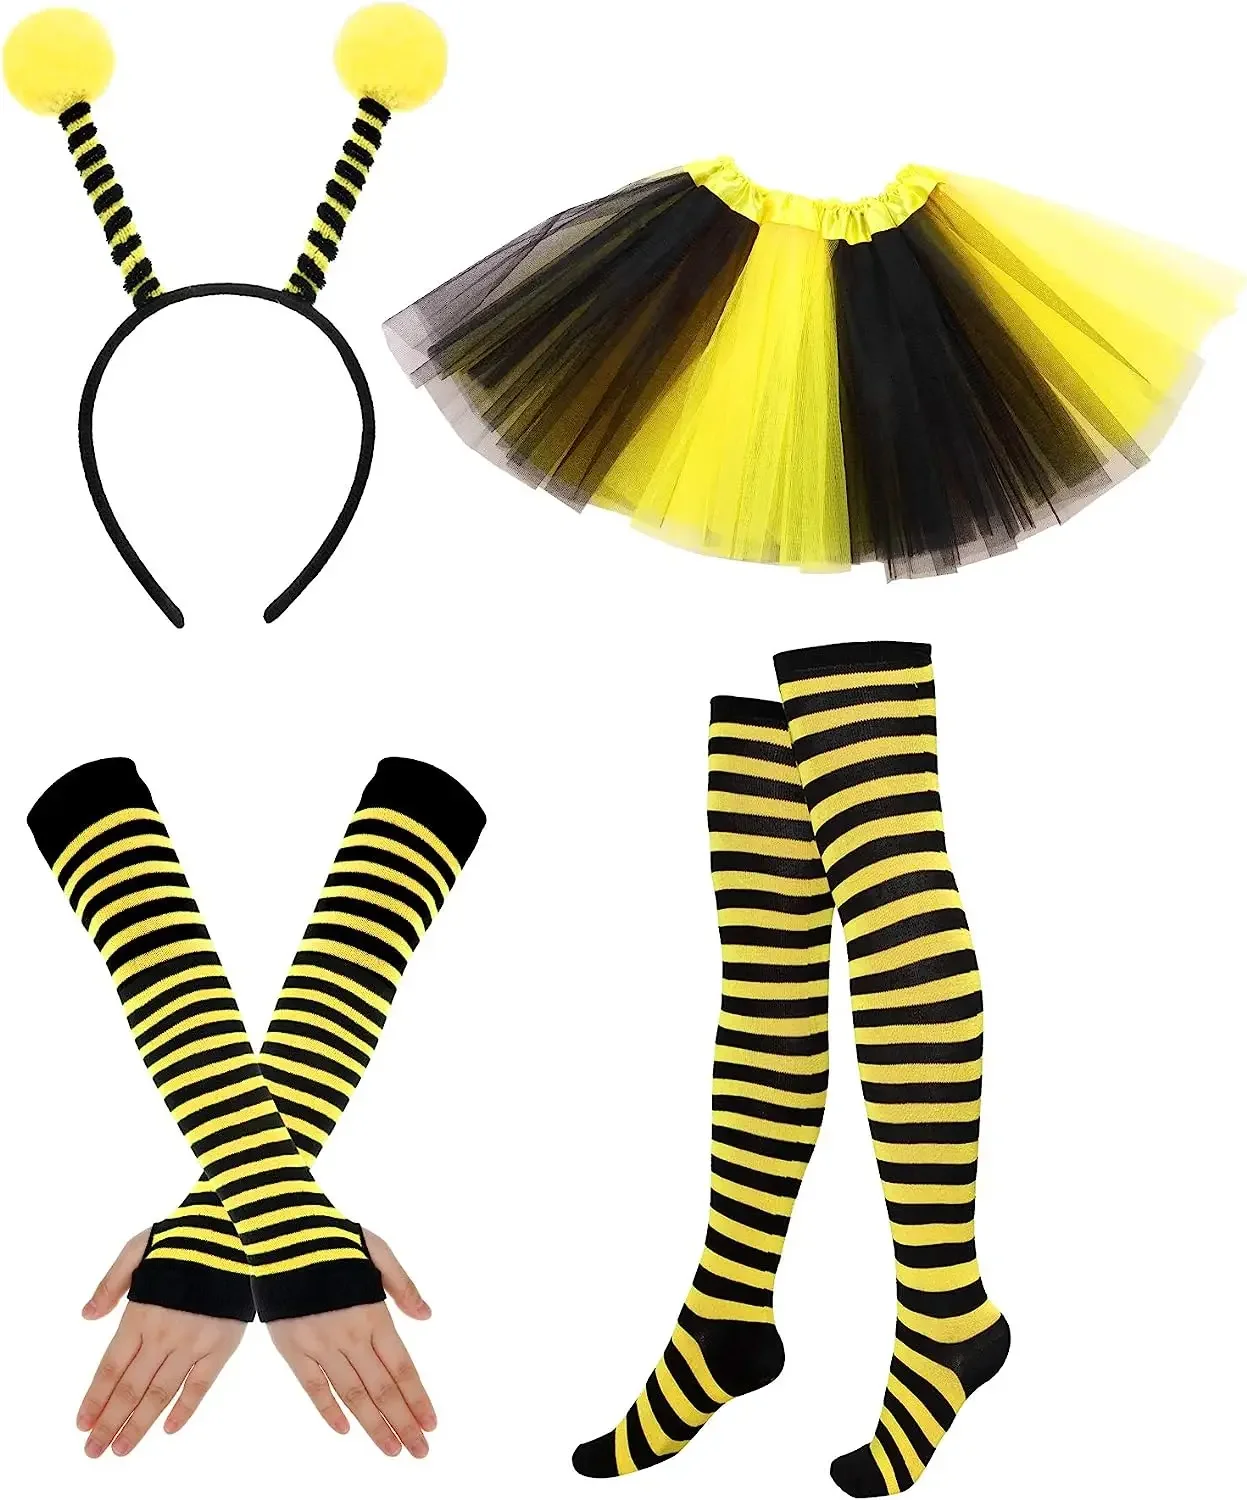 

Kids Adult Family Bee Bopper Antenna Headband Tutu Skirt Bee Striped Leg Warmers Knee Stocking and Gloves for Cosplay Party